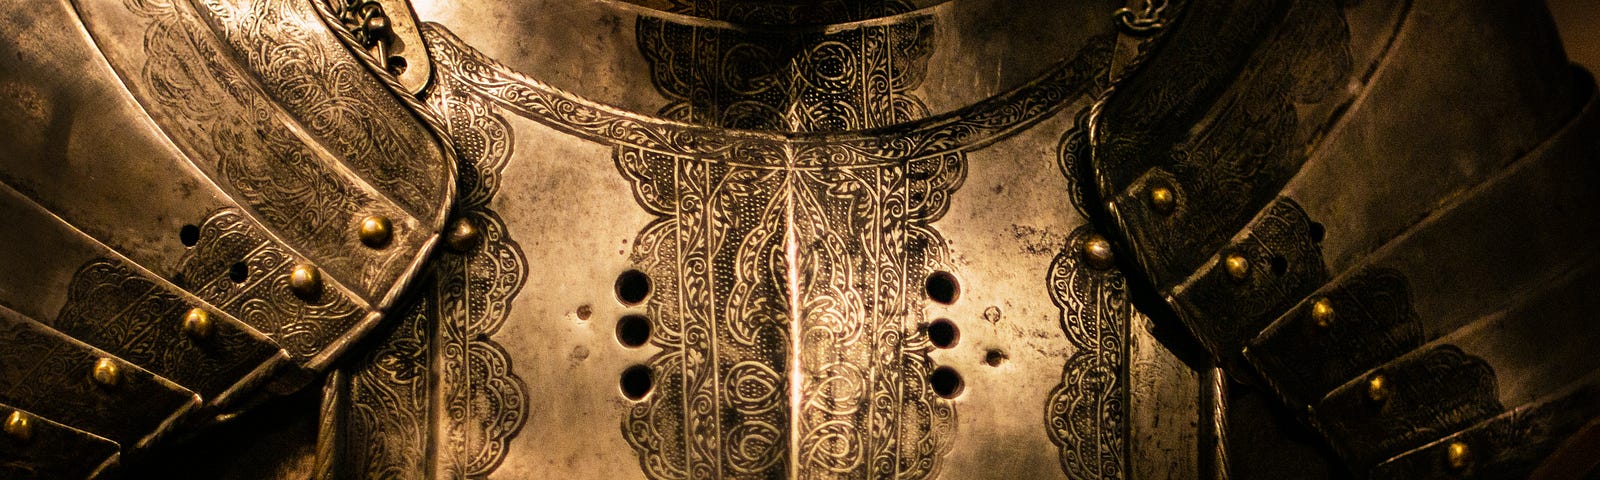 The chest of a golden suit of armour.